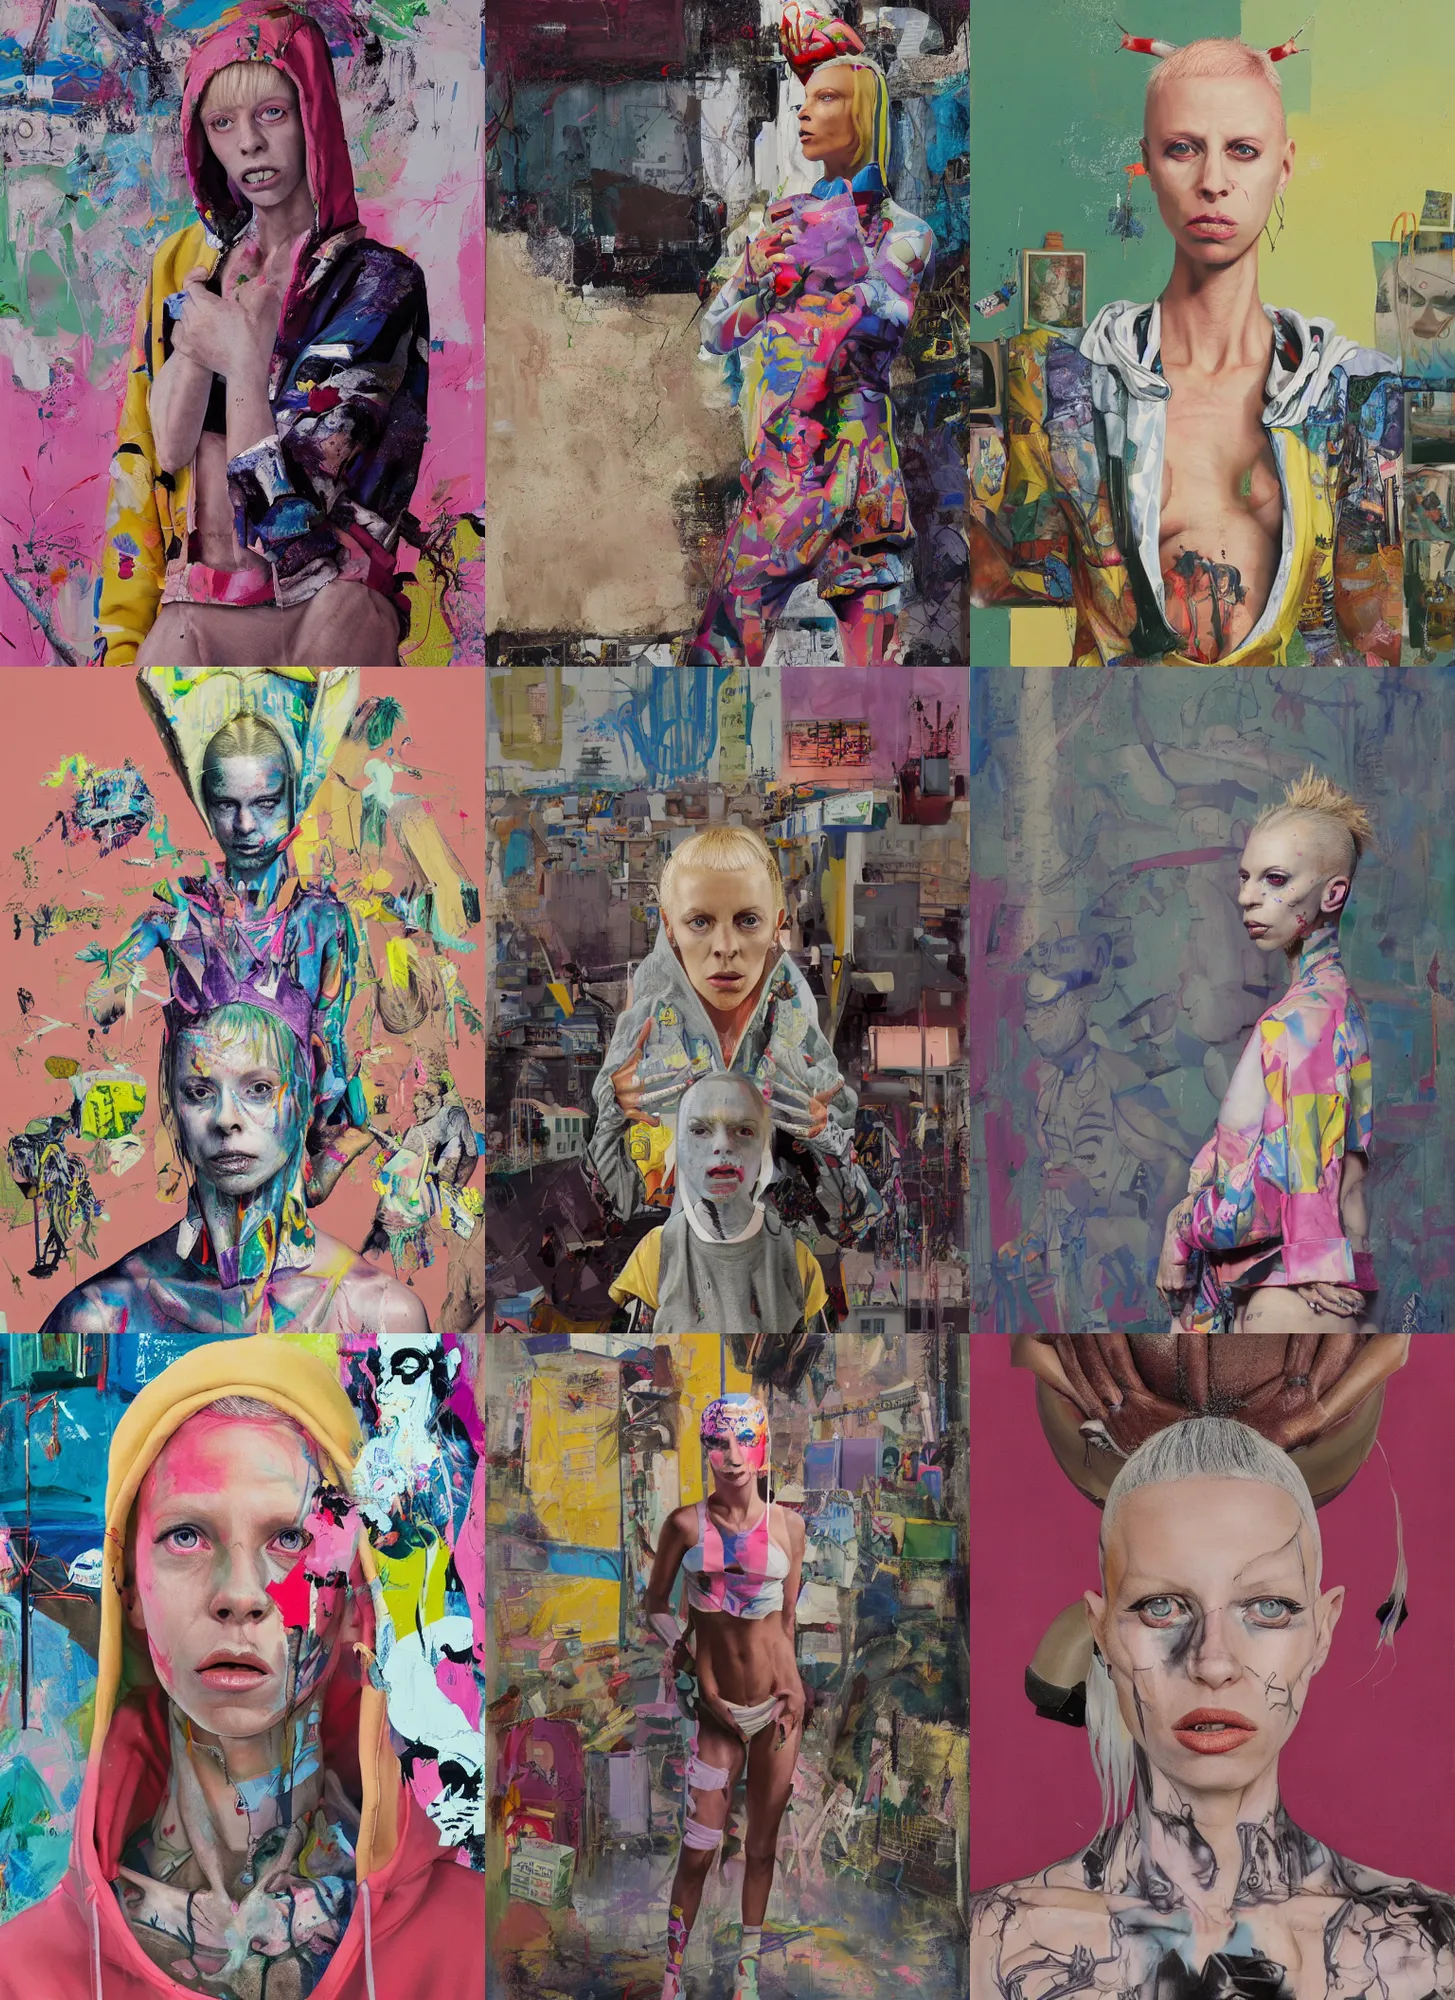 Prompt: still from music video of yolandi visser from die antwoord standing in a township street, wearing a hoodie, street clothes, full figure portrait painting by njideka akunyili crosby and martine johanna, earl norem, ismail inceoglu, pastel color palette, 3 5 mm lens